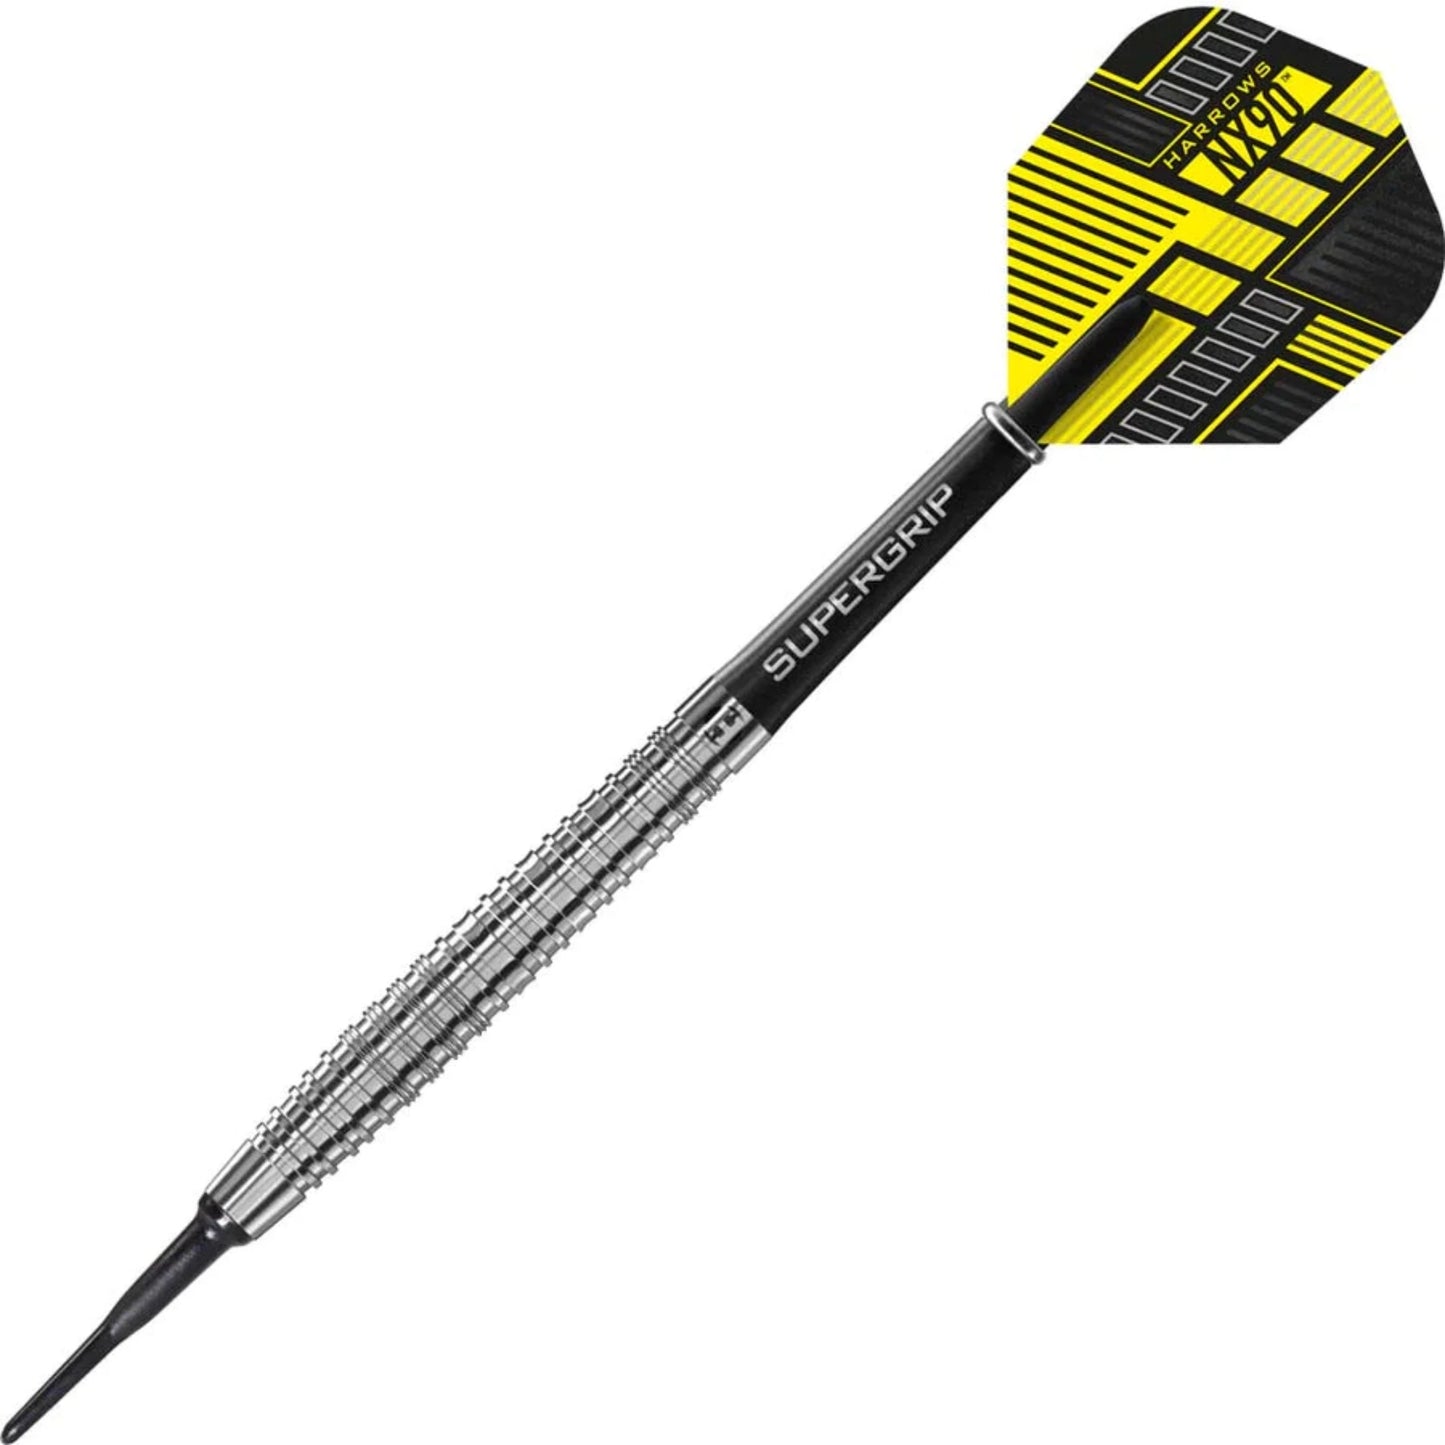 Harrows NX90 Soft Tip Darts with a 90% silver tungsten barrel featuring a combination of ringed, micro, and scalloped cuts for an advanced grip, tailored for intermediate and expert players.